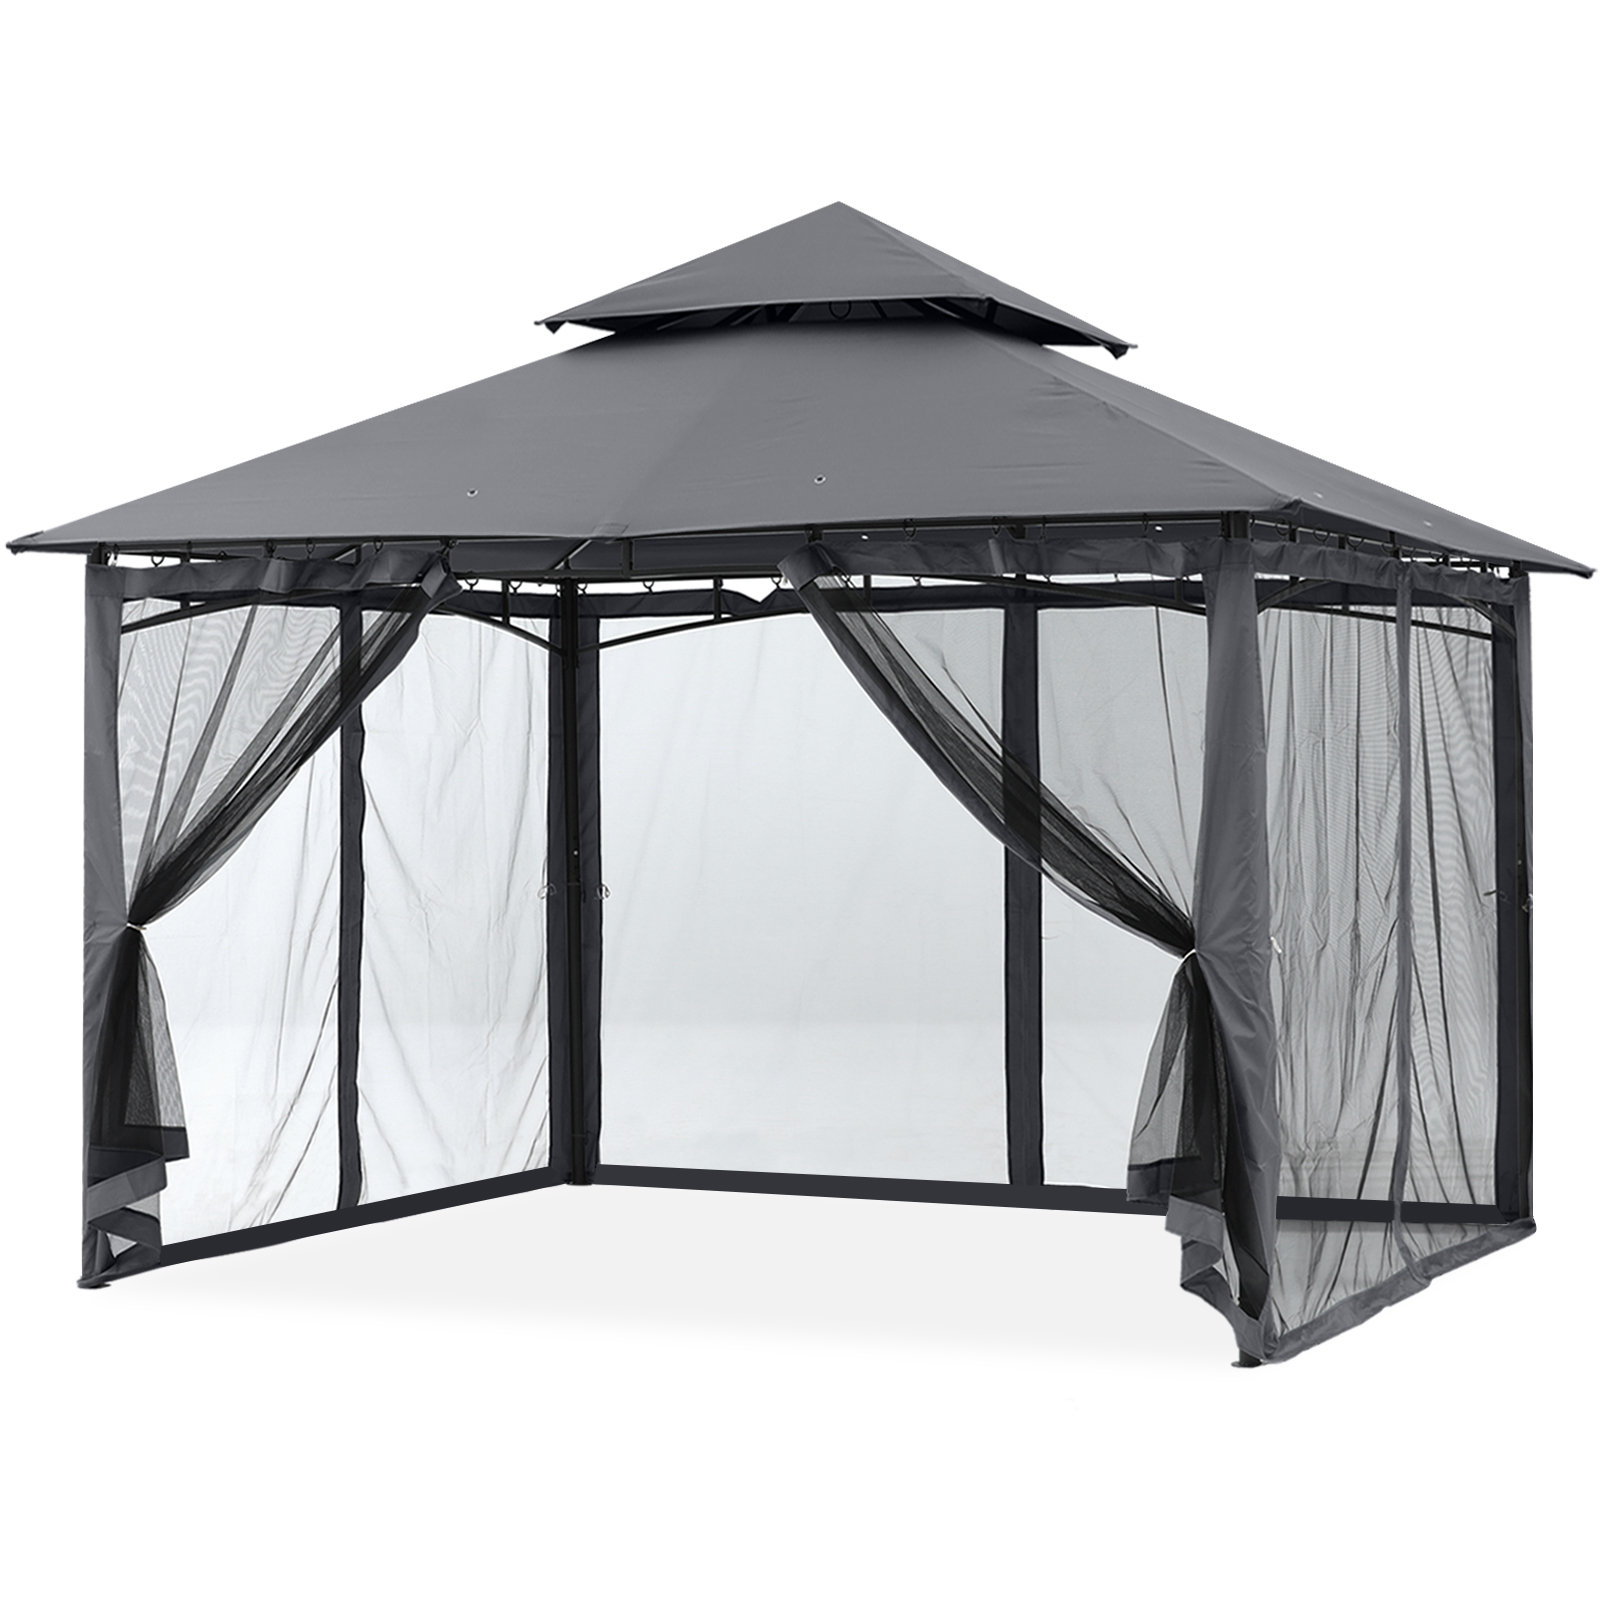 Backyard and Deck MASTERCANOPY 10x10 Double-Tiered Patio Gazebo with Mosquito Netting Screen Walls for Lawn Garden Gray 